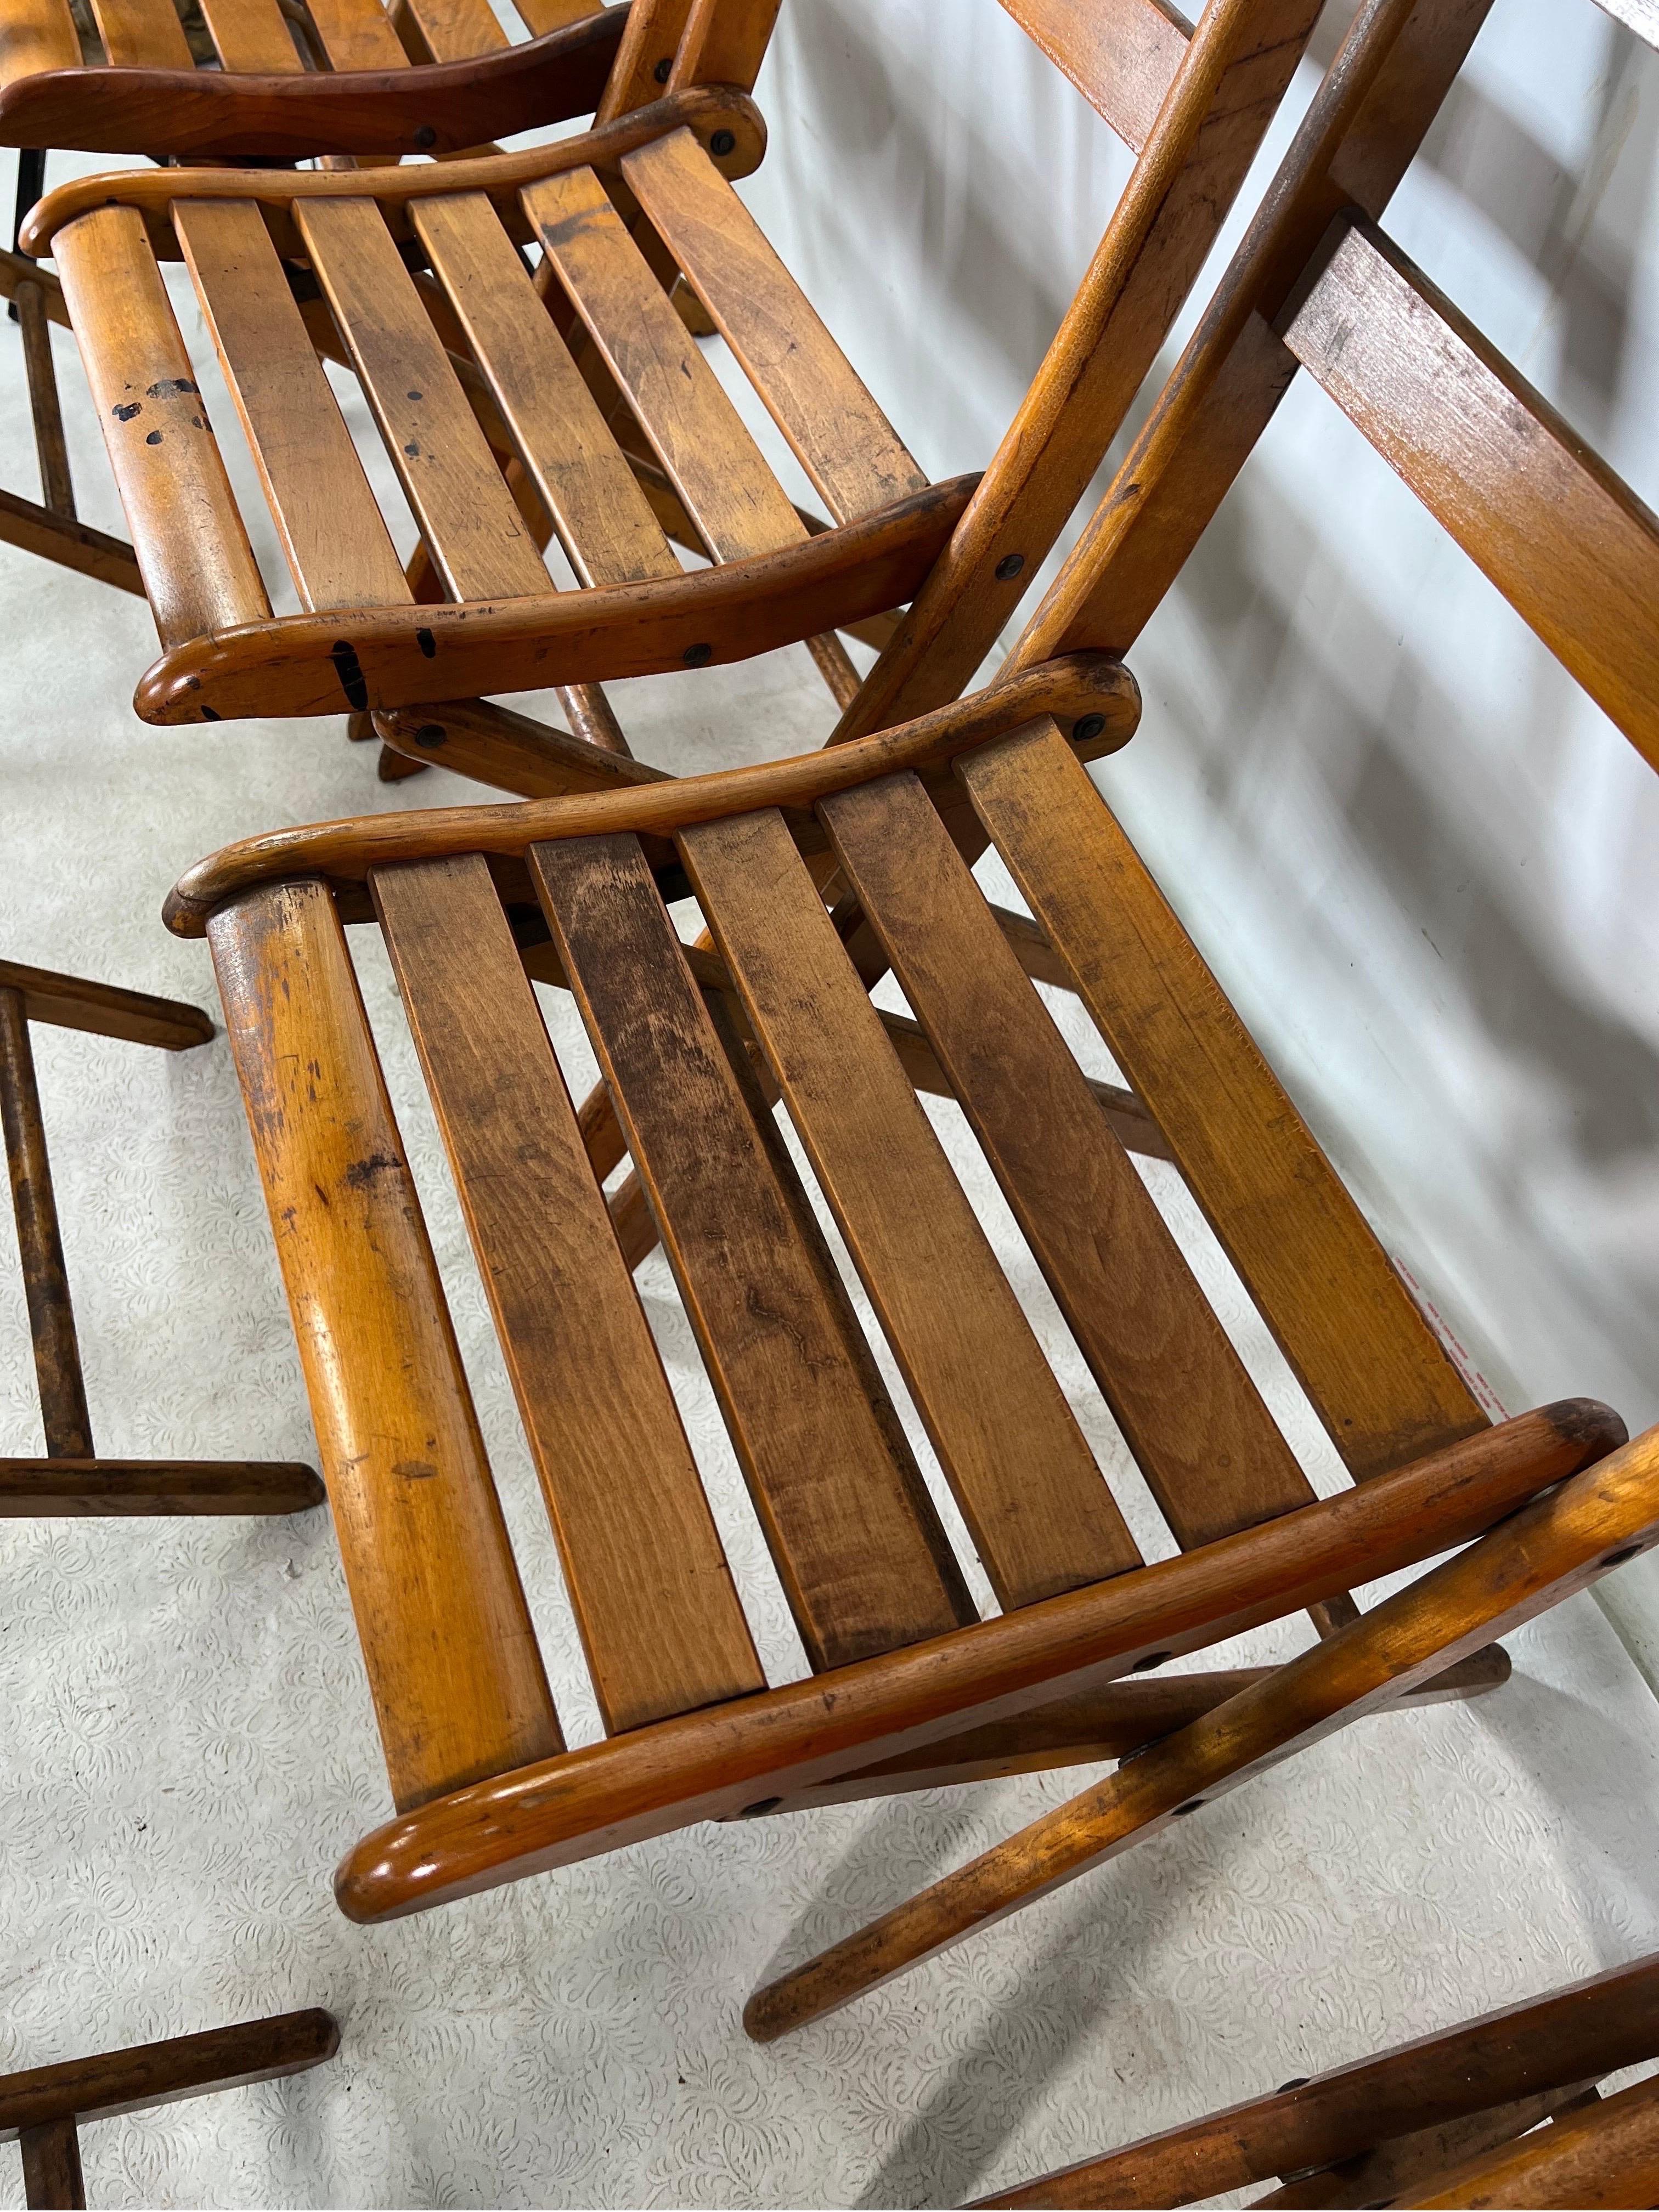 Vintage Folding Slatted Chairs, a Set of 7 In Good Condition For Sale In Esperance, NY